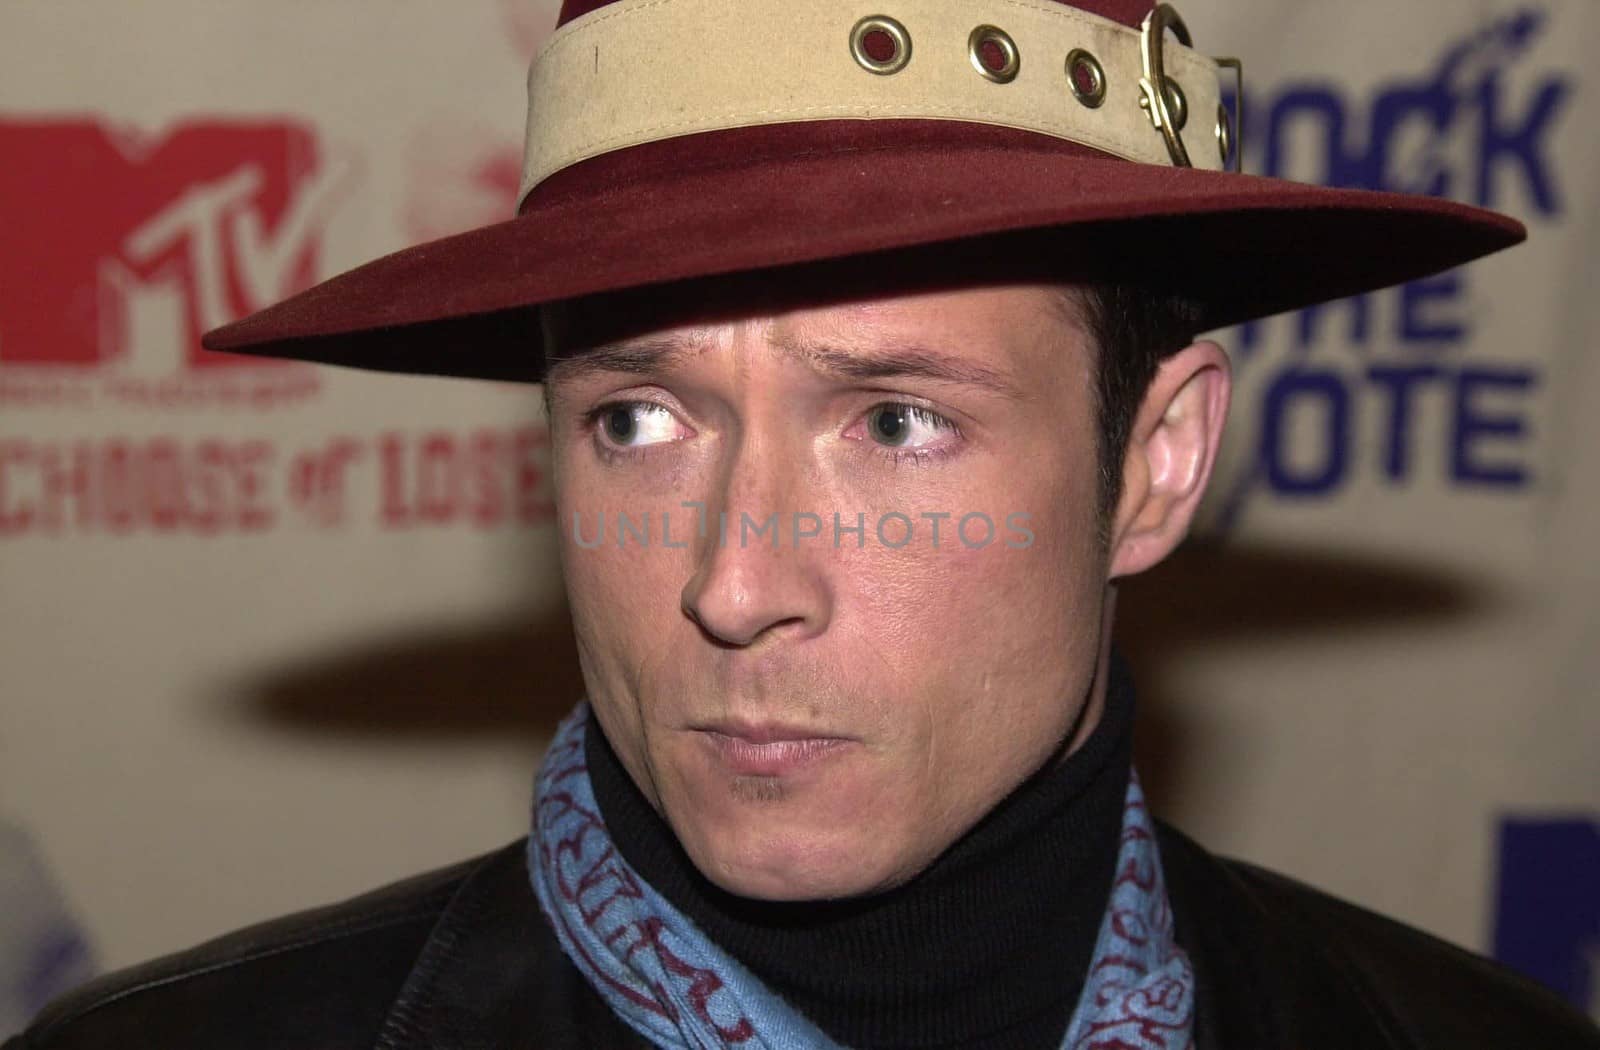 Scott Weyland of Stone Temple Pilots at an MTV Rock The Vote Rally, House Of Blues, Hollywood, 02-11-00